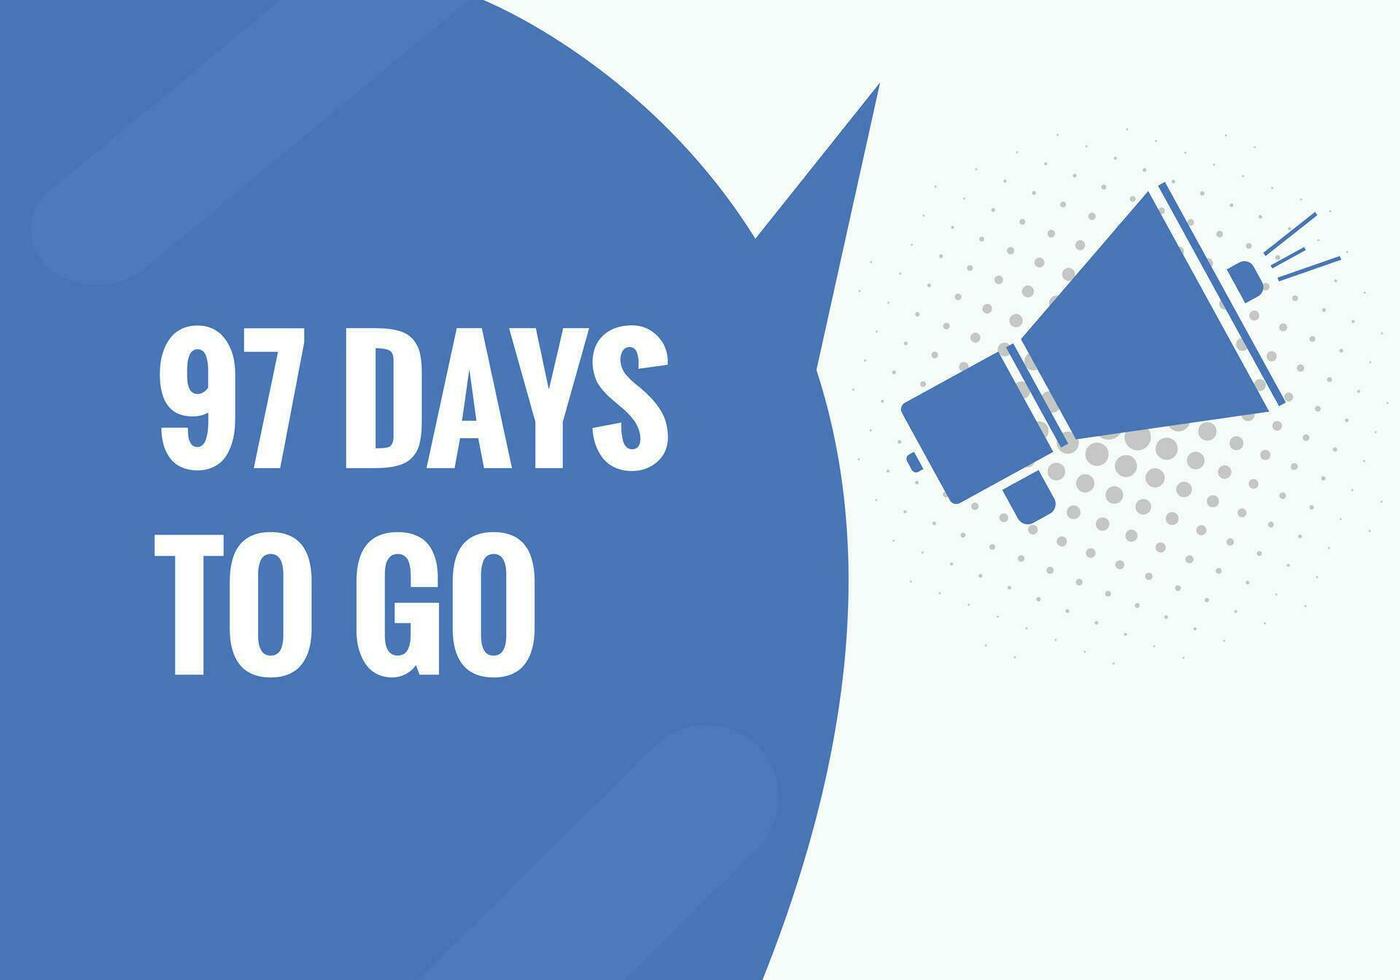 97 days to go countdown template. 97 day Countdown left days banner design vector